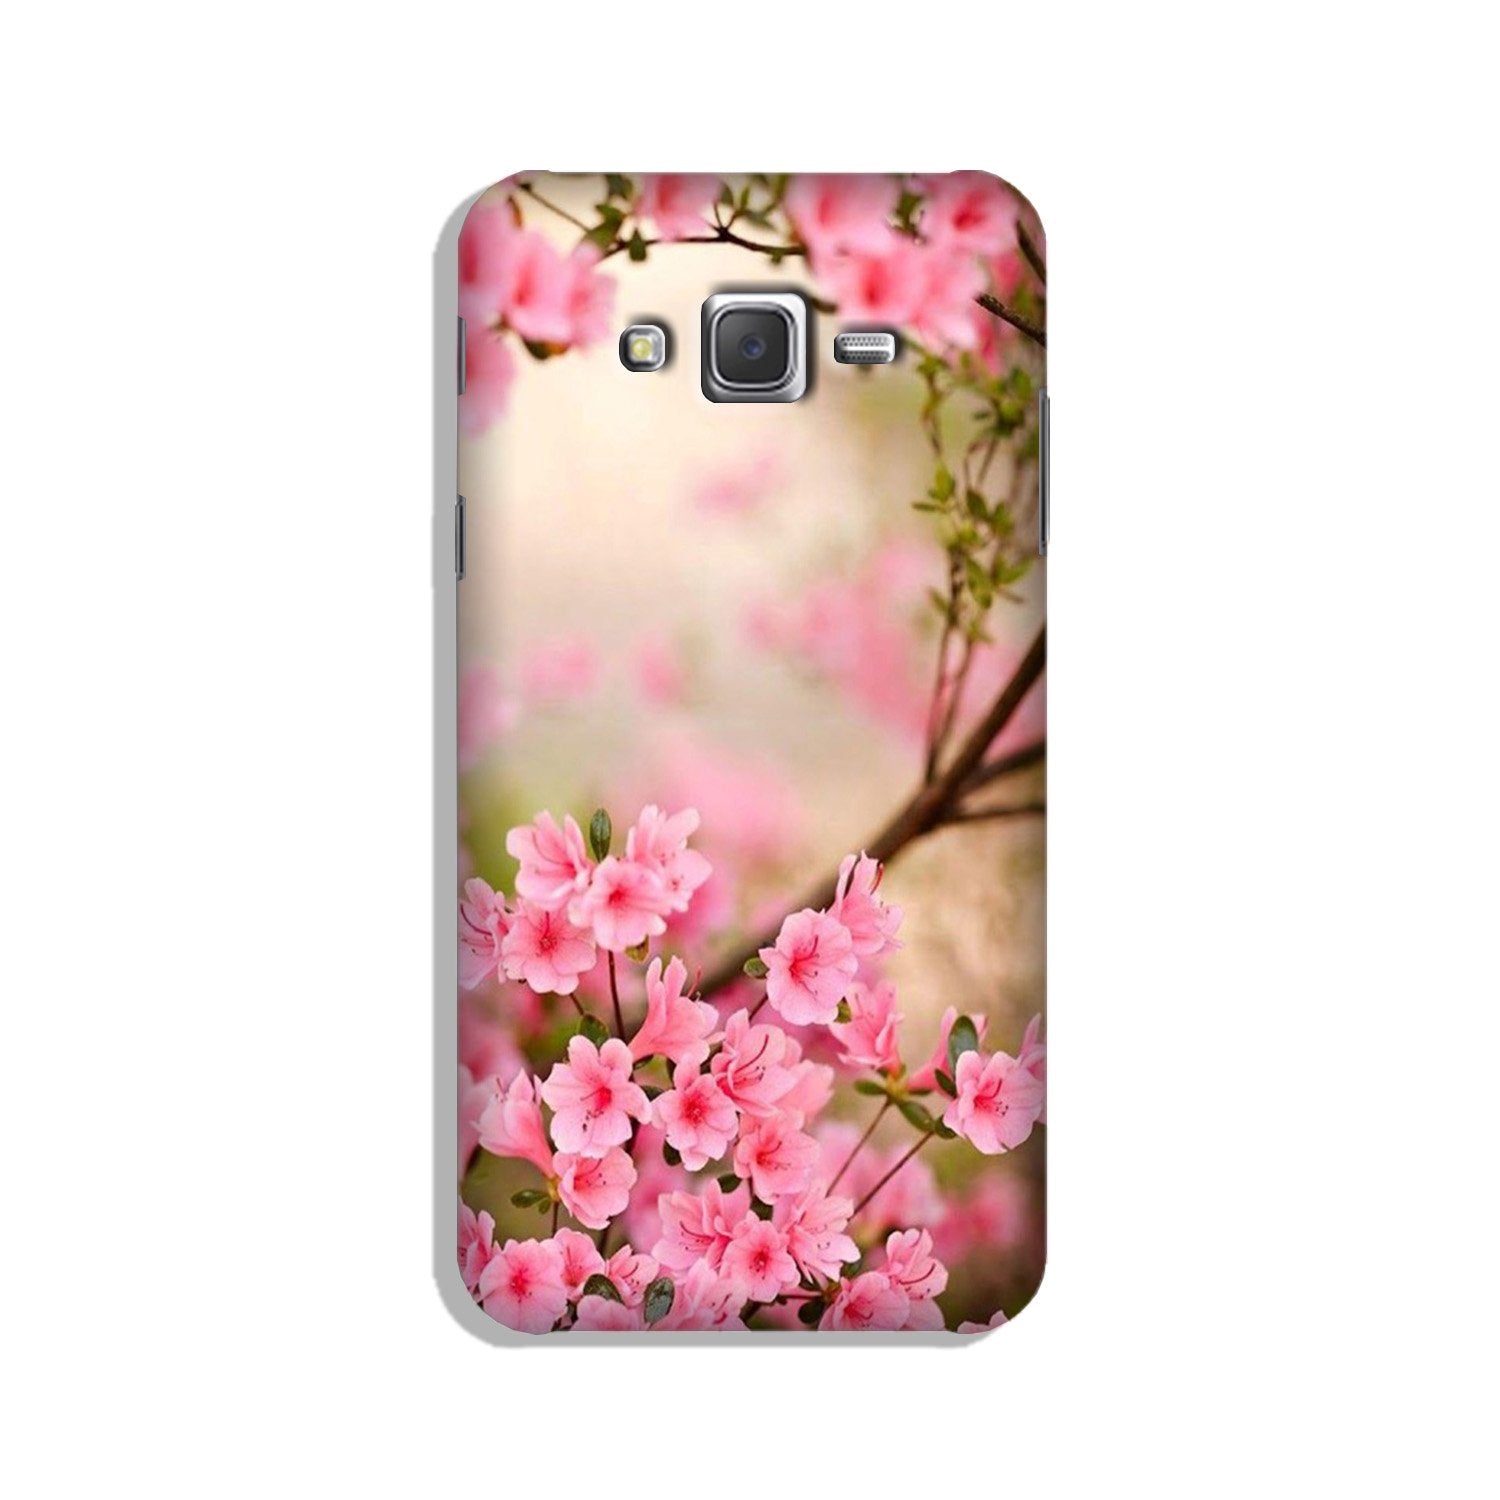 Pink flowers Case for Galaxy J7 (2015)